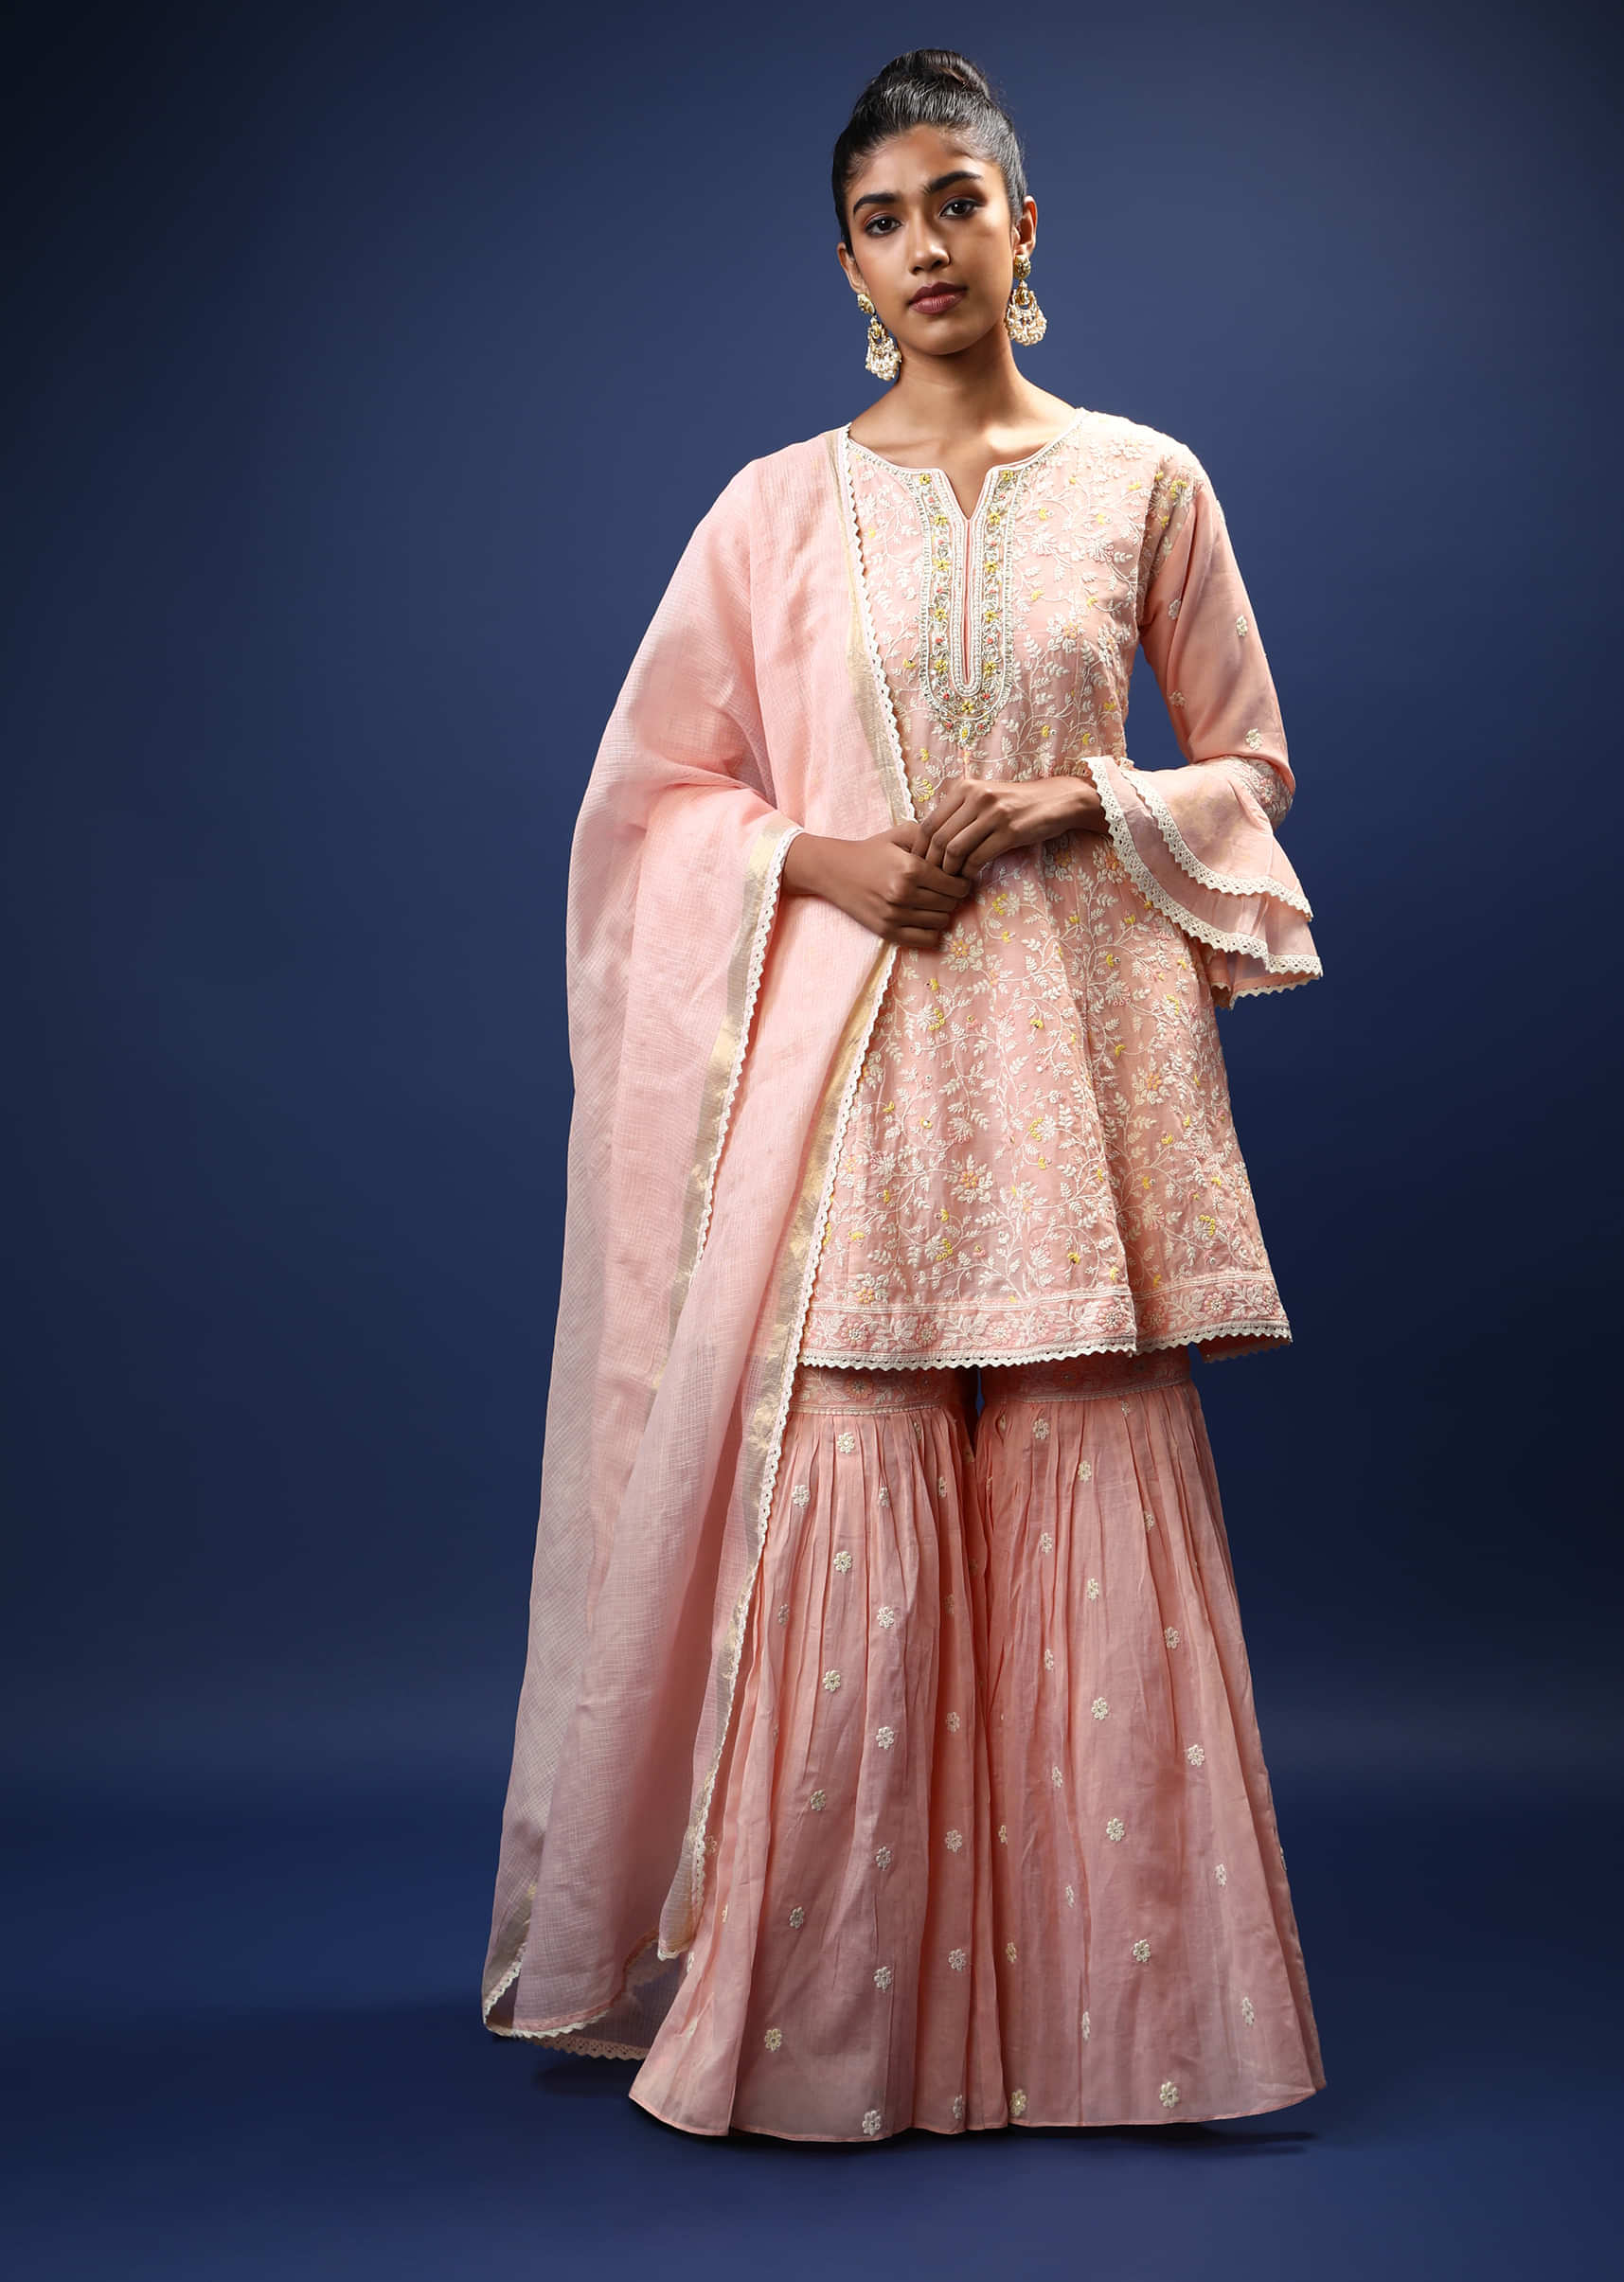 Baby Pink Sharara Peplum Suit In Cotton With Pastel And White Thread Embroidered Floral Motifs And Ruffle Sleeves  